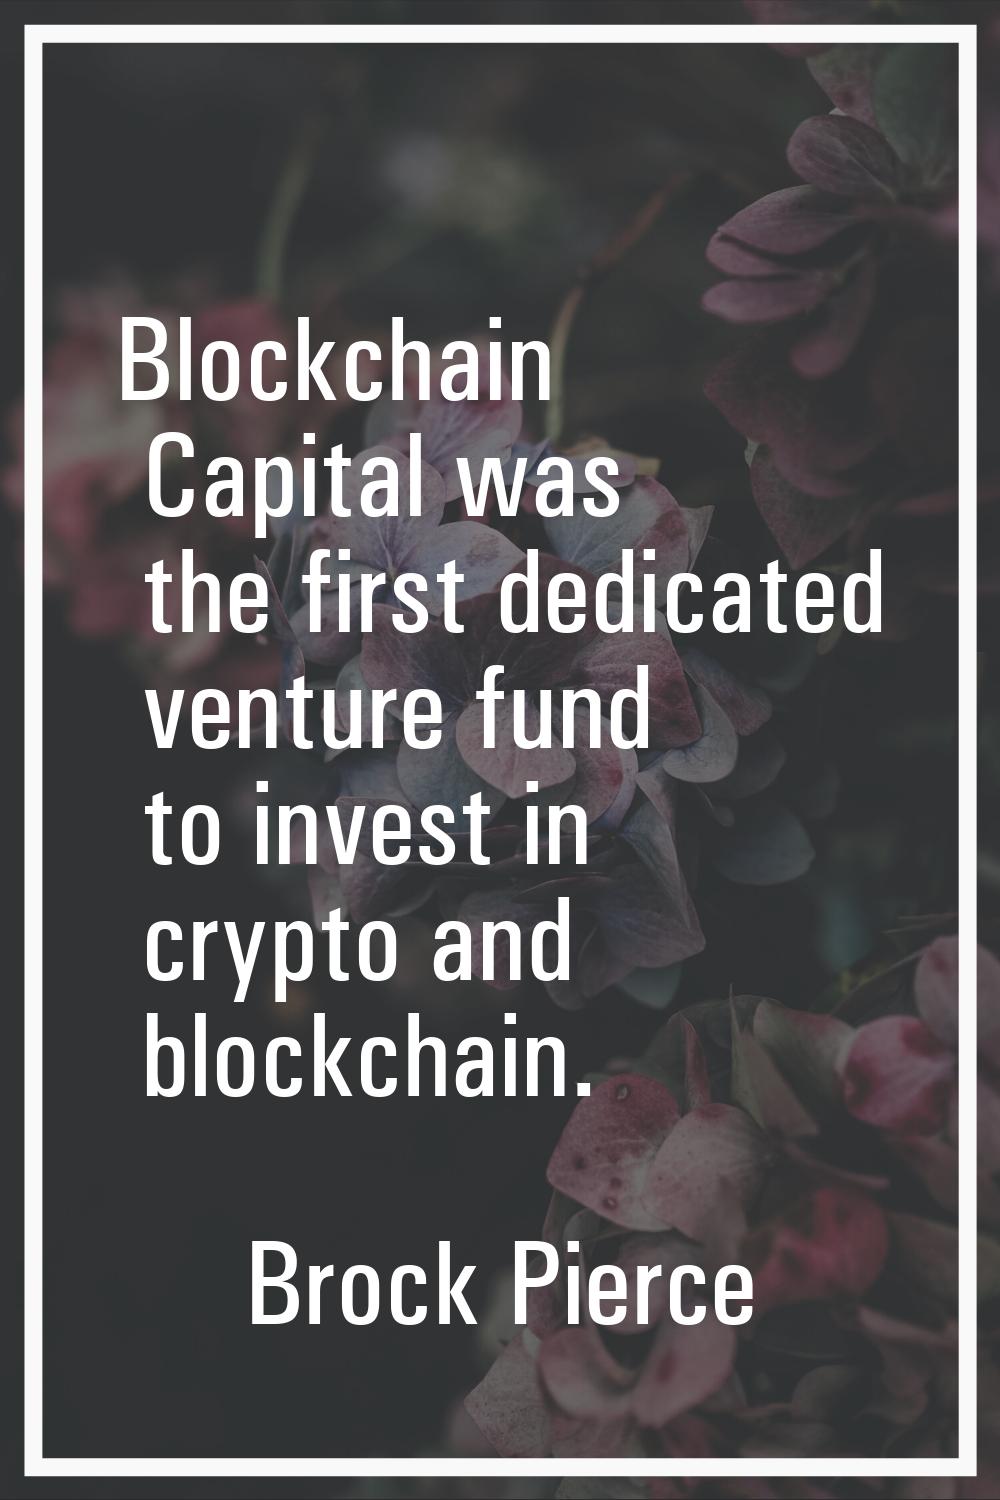 Blockchain Capital was the first dedicated venture fund to invest in crypto and blockchain.